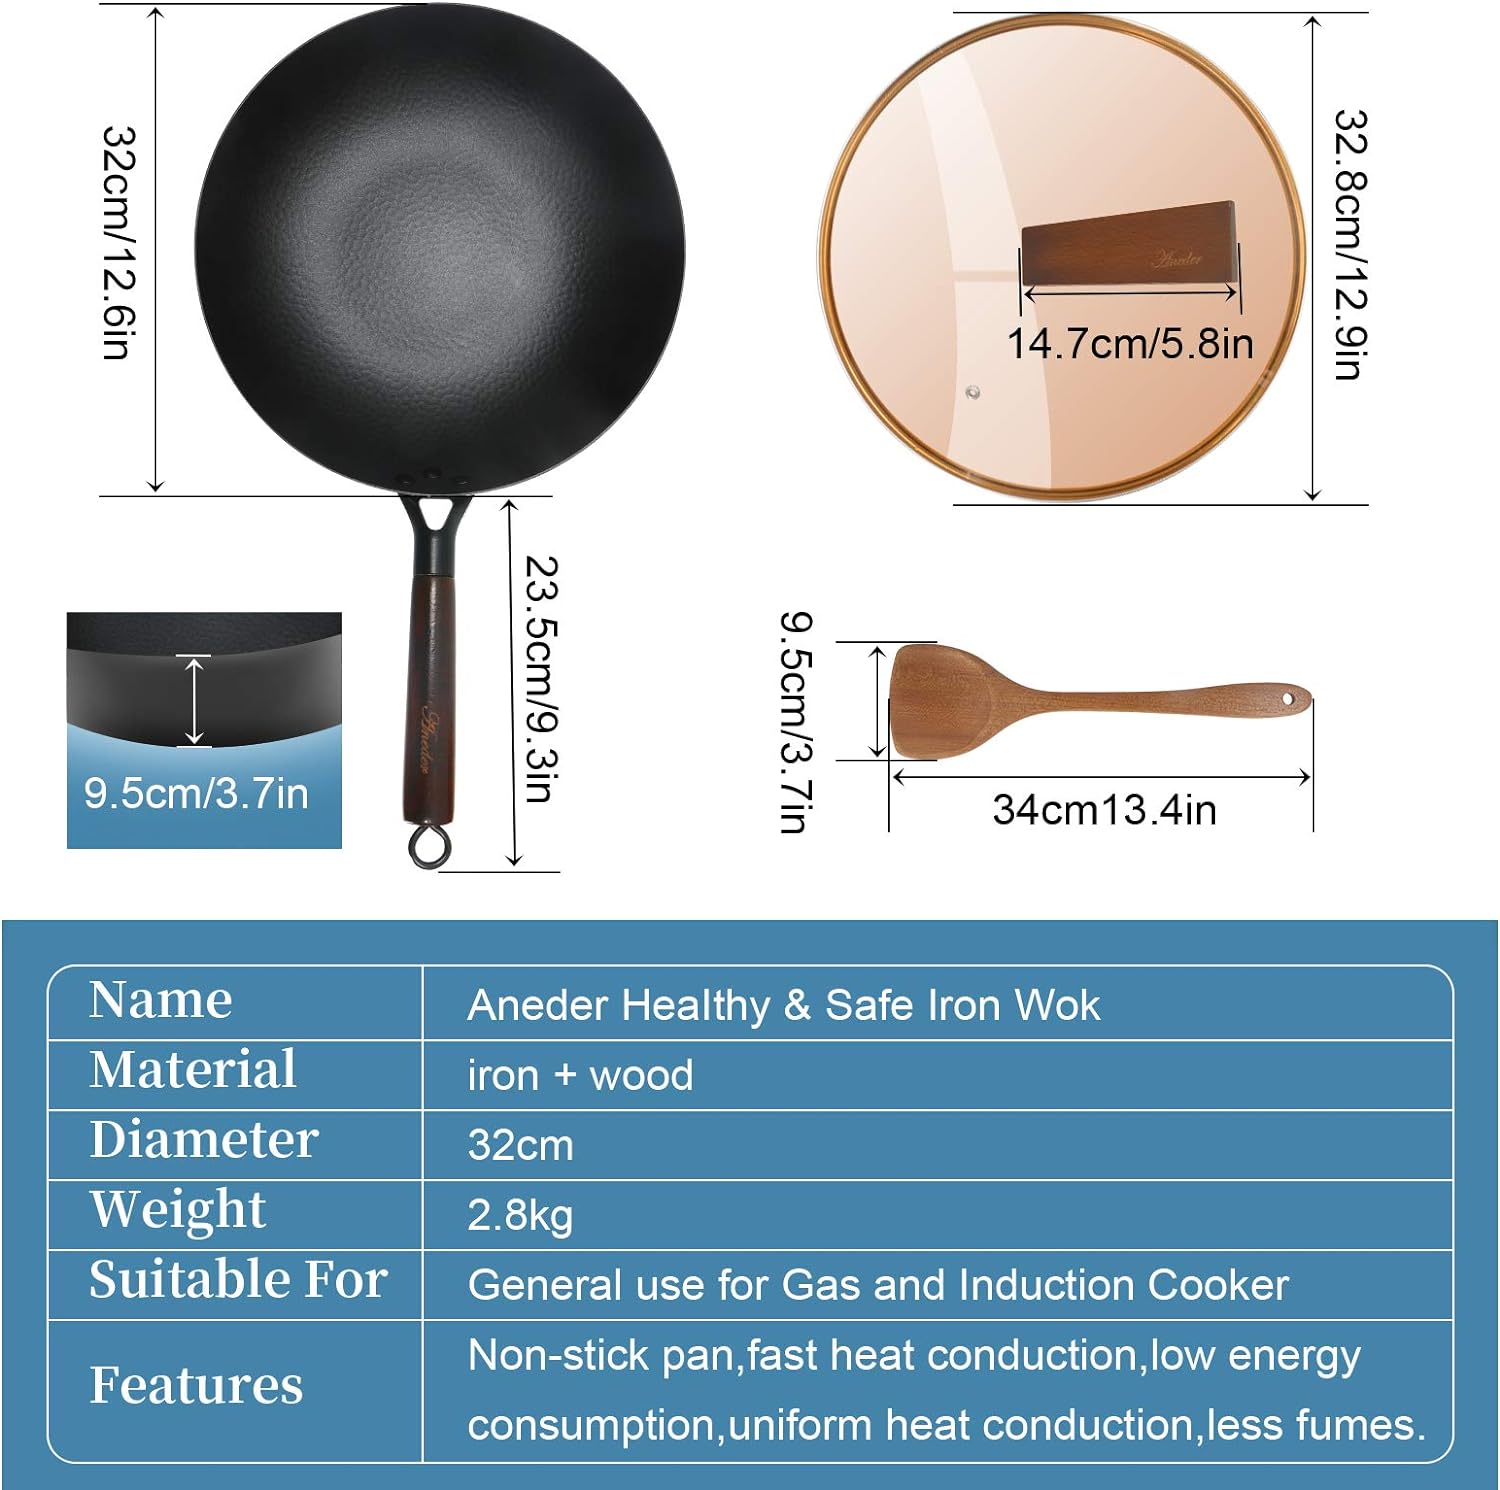 ANEDER Carbon Steel Wok Pan with Lid & Wood Spatula Review